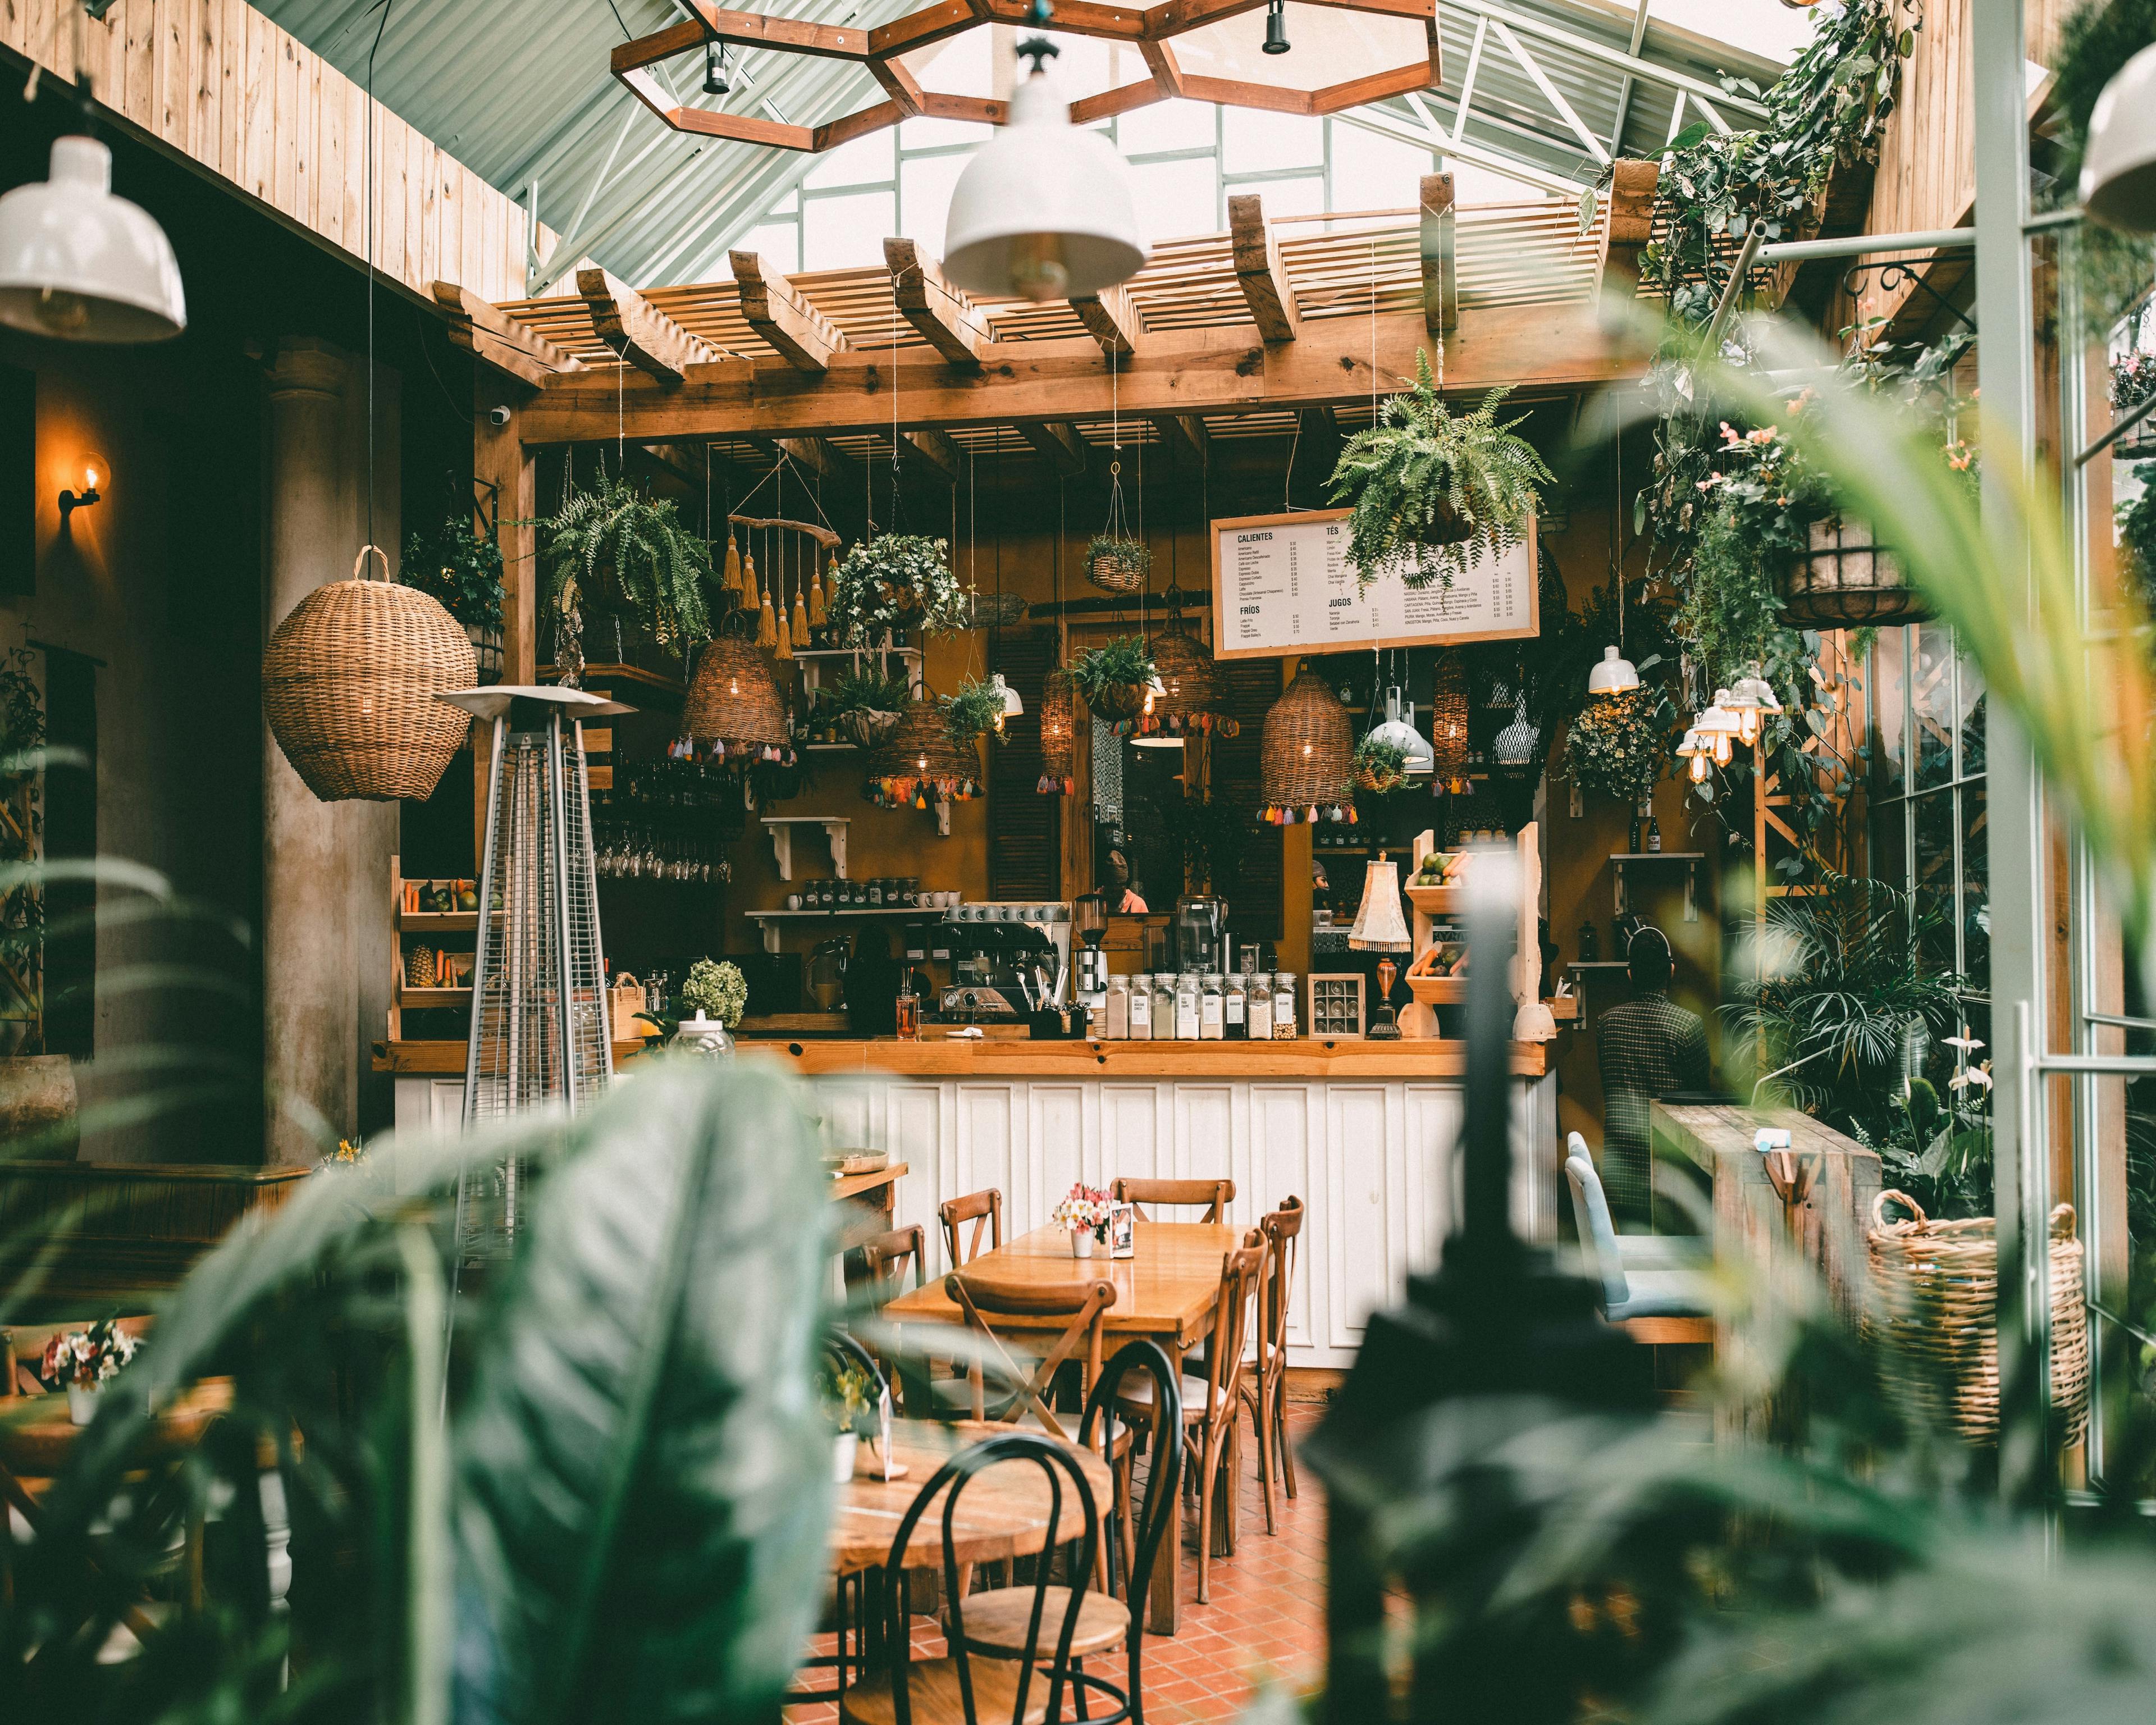 A cozy restaurant with many plants